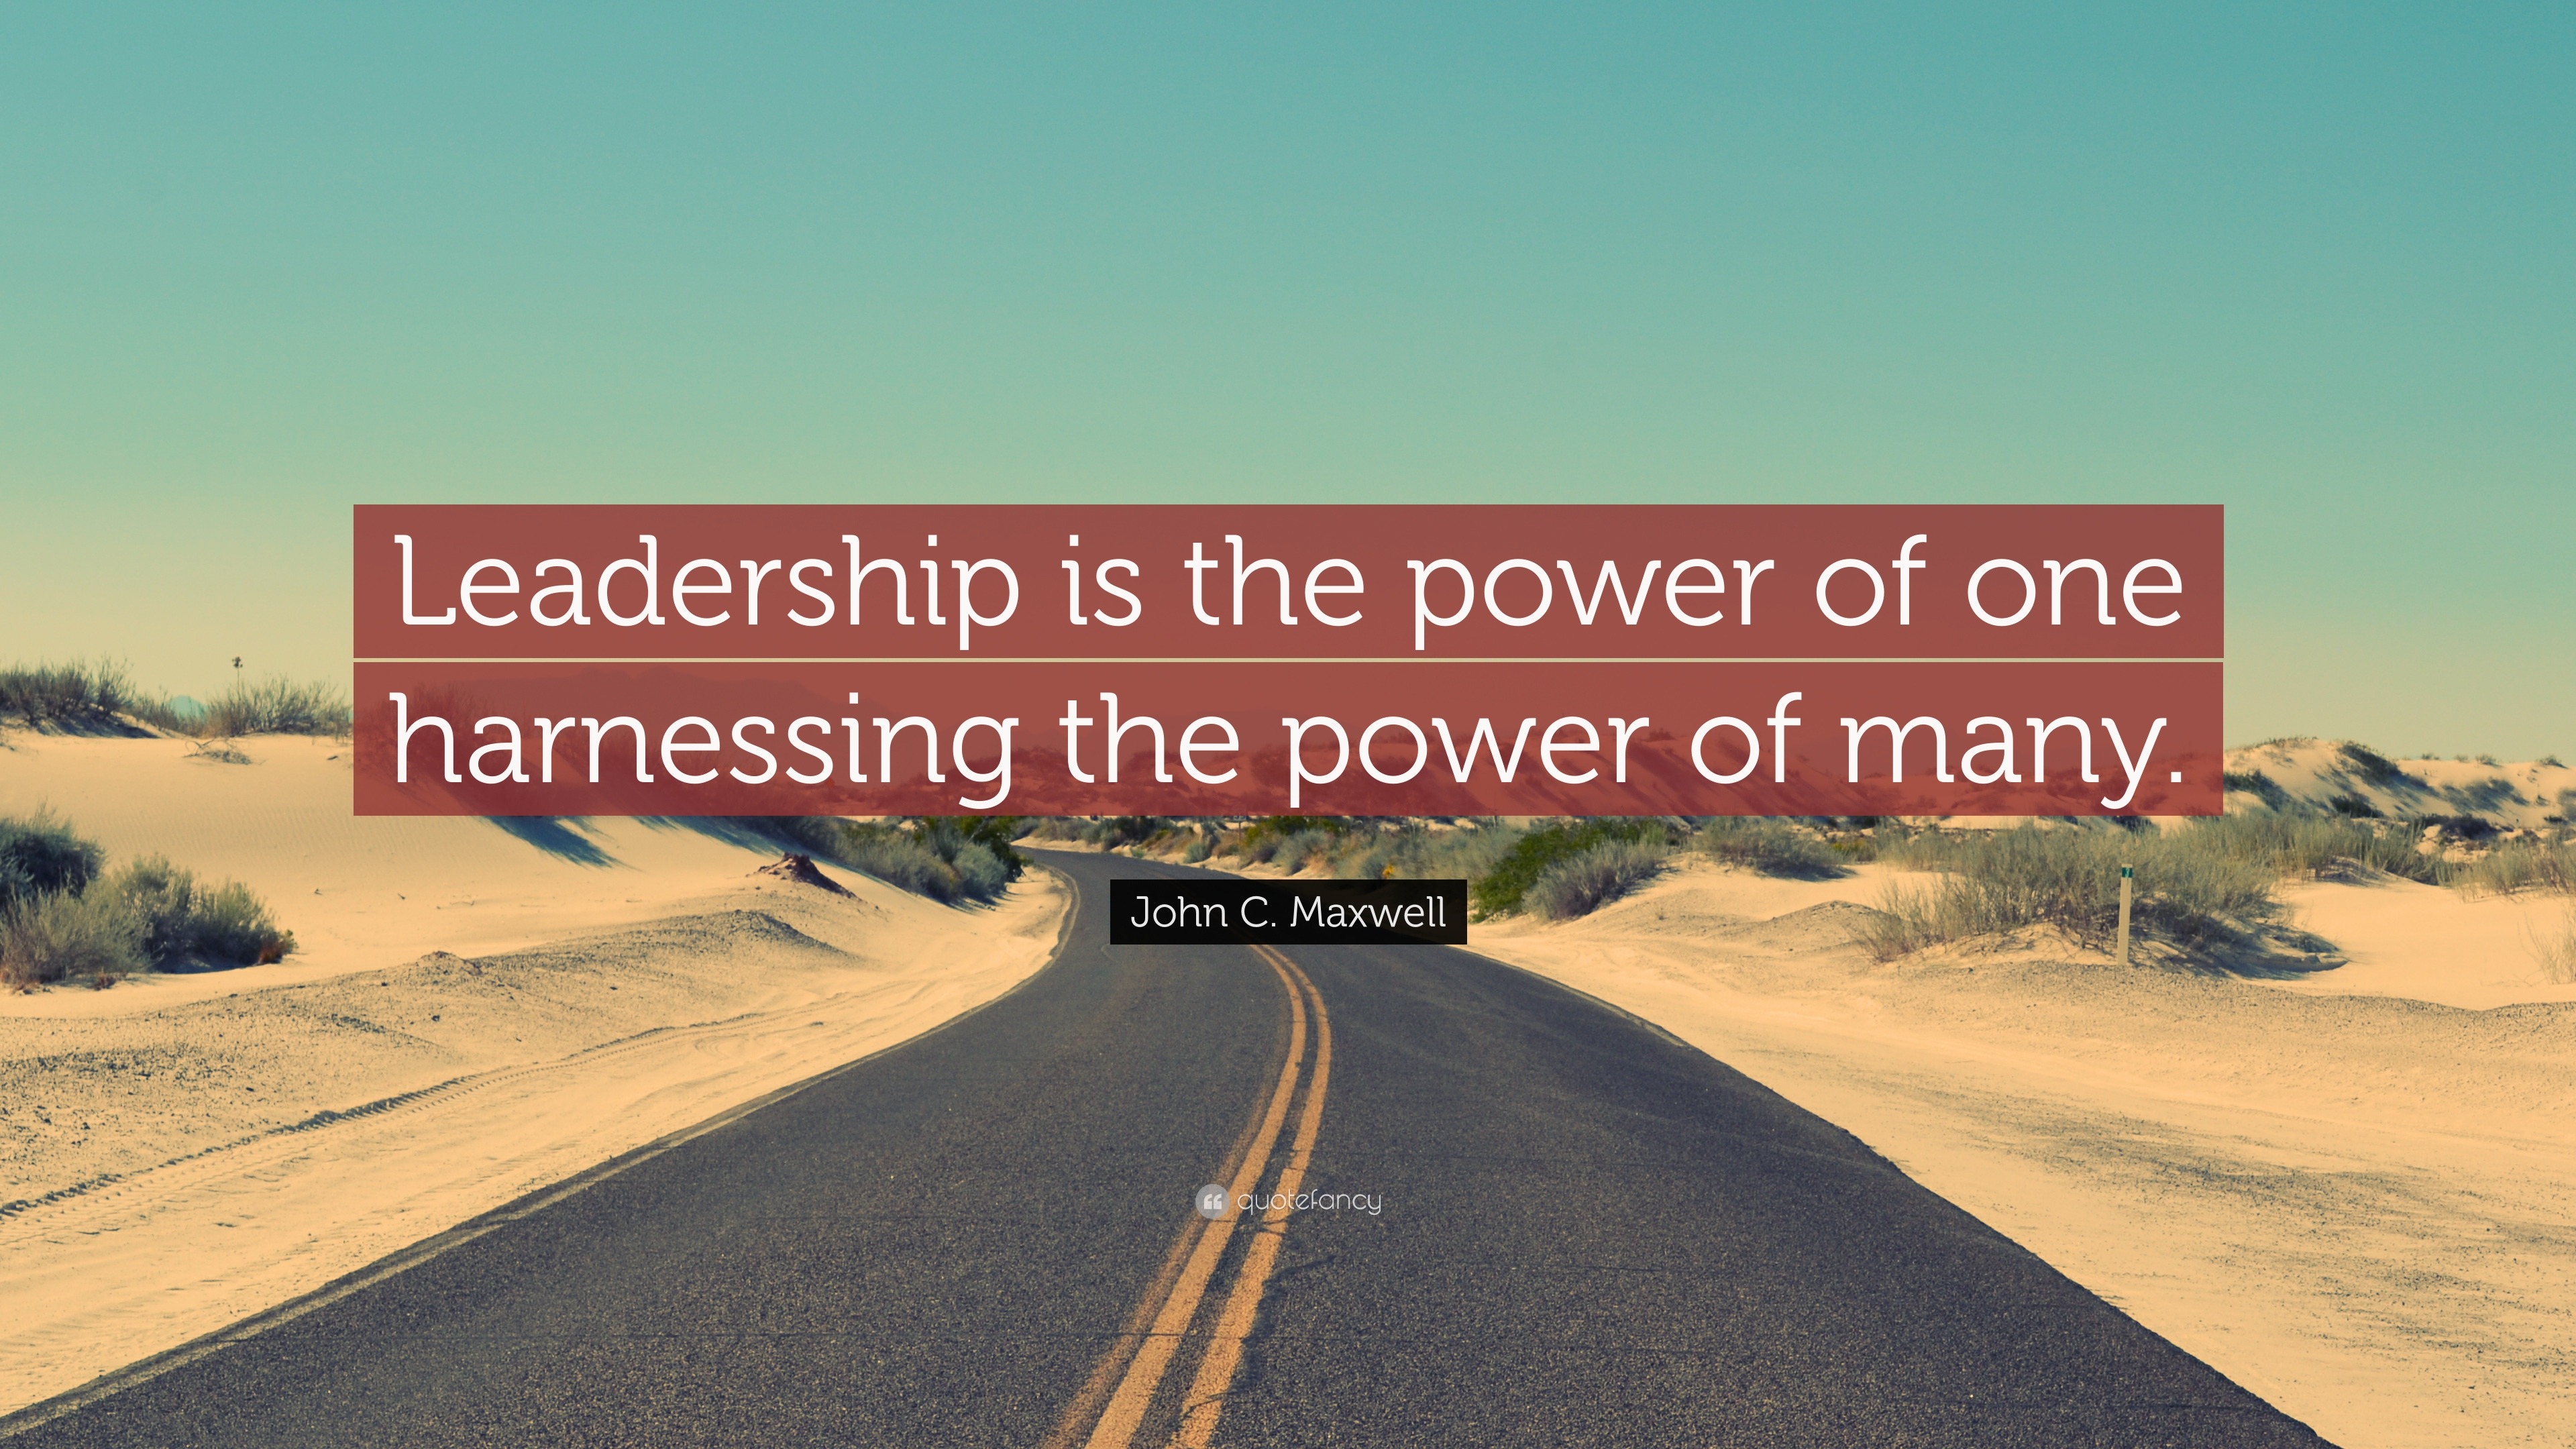 John C. Maxwell Quote: “Leadership is the power of one harnessing the ...